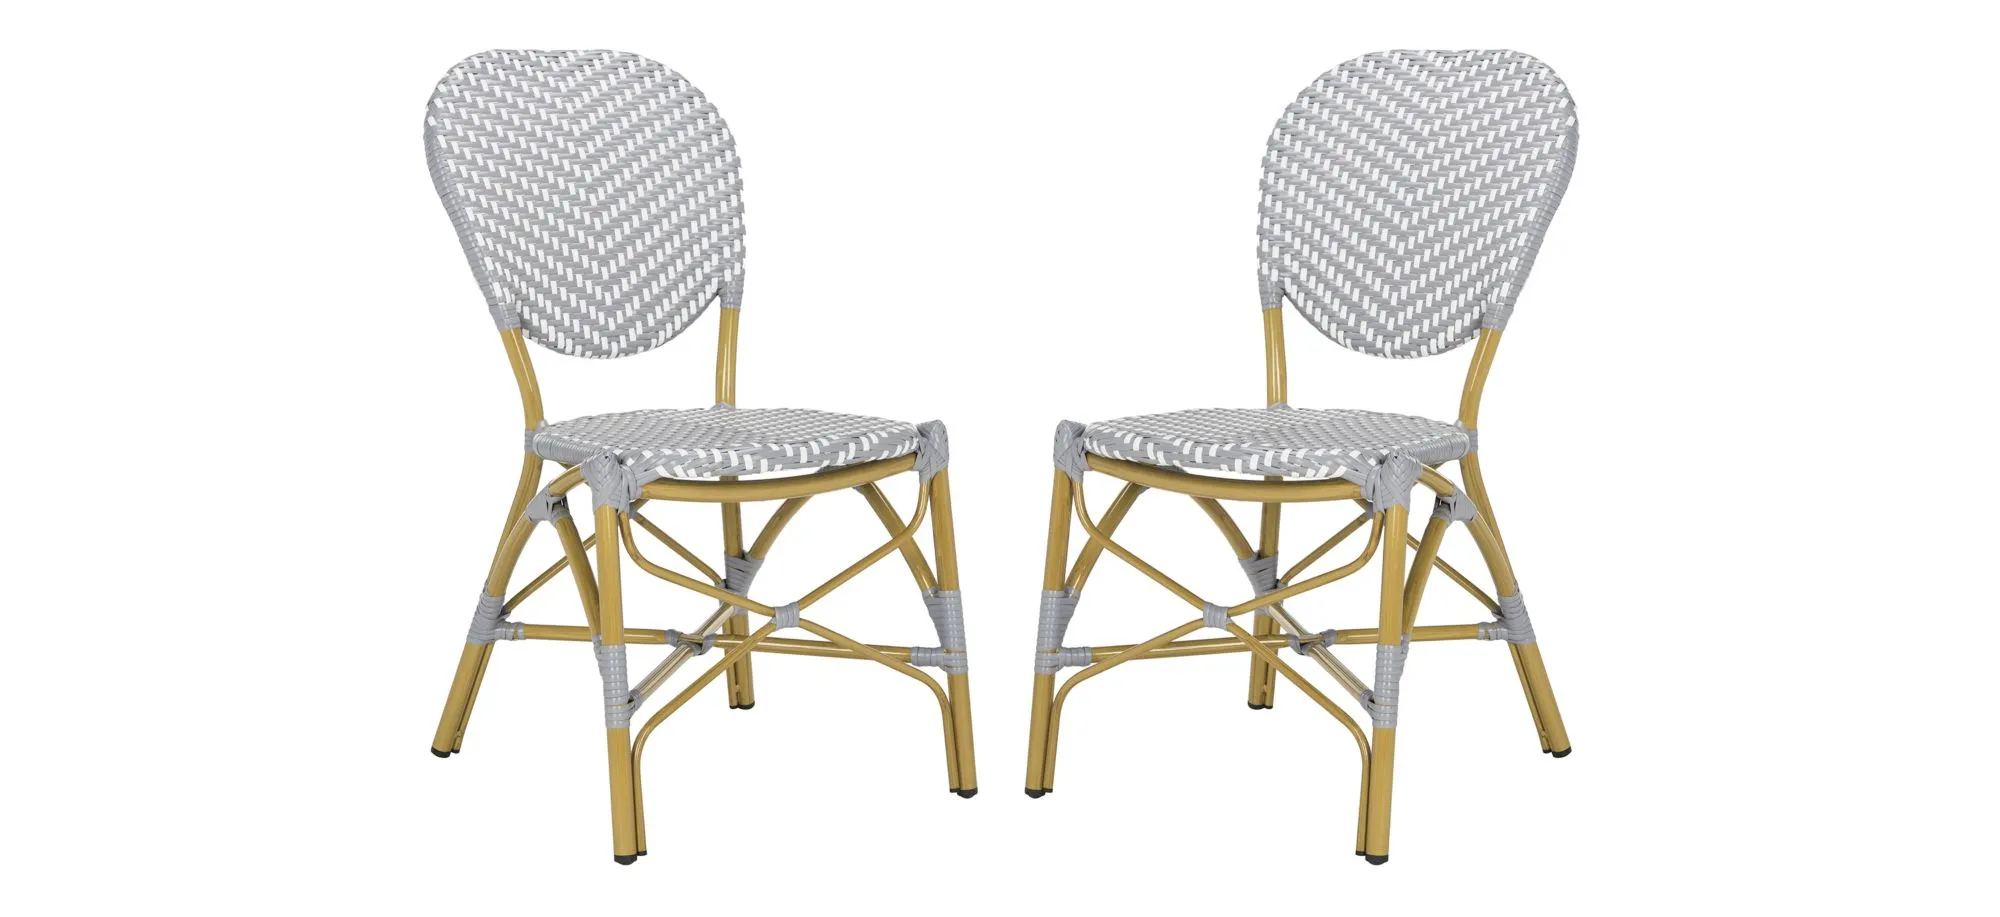 Europa Outdoor French Bistro Side Chair - Set of 2 in Breeze by Safavieh